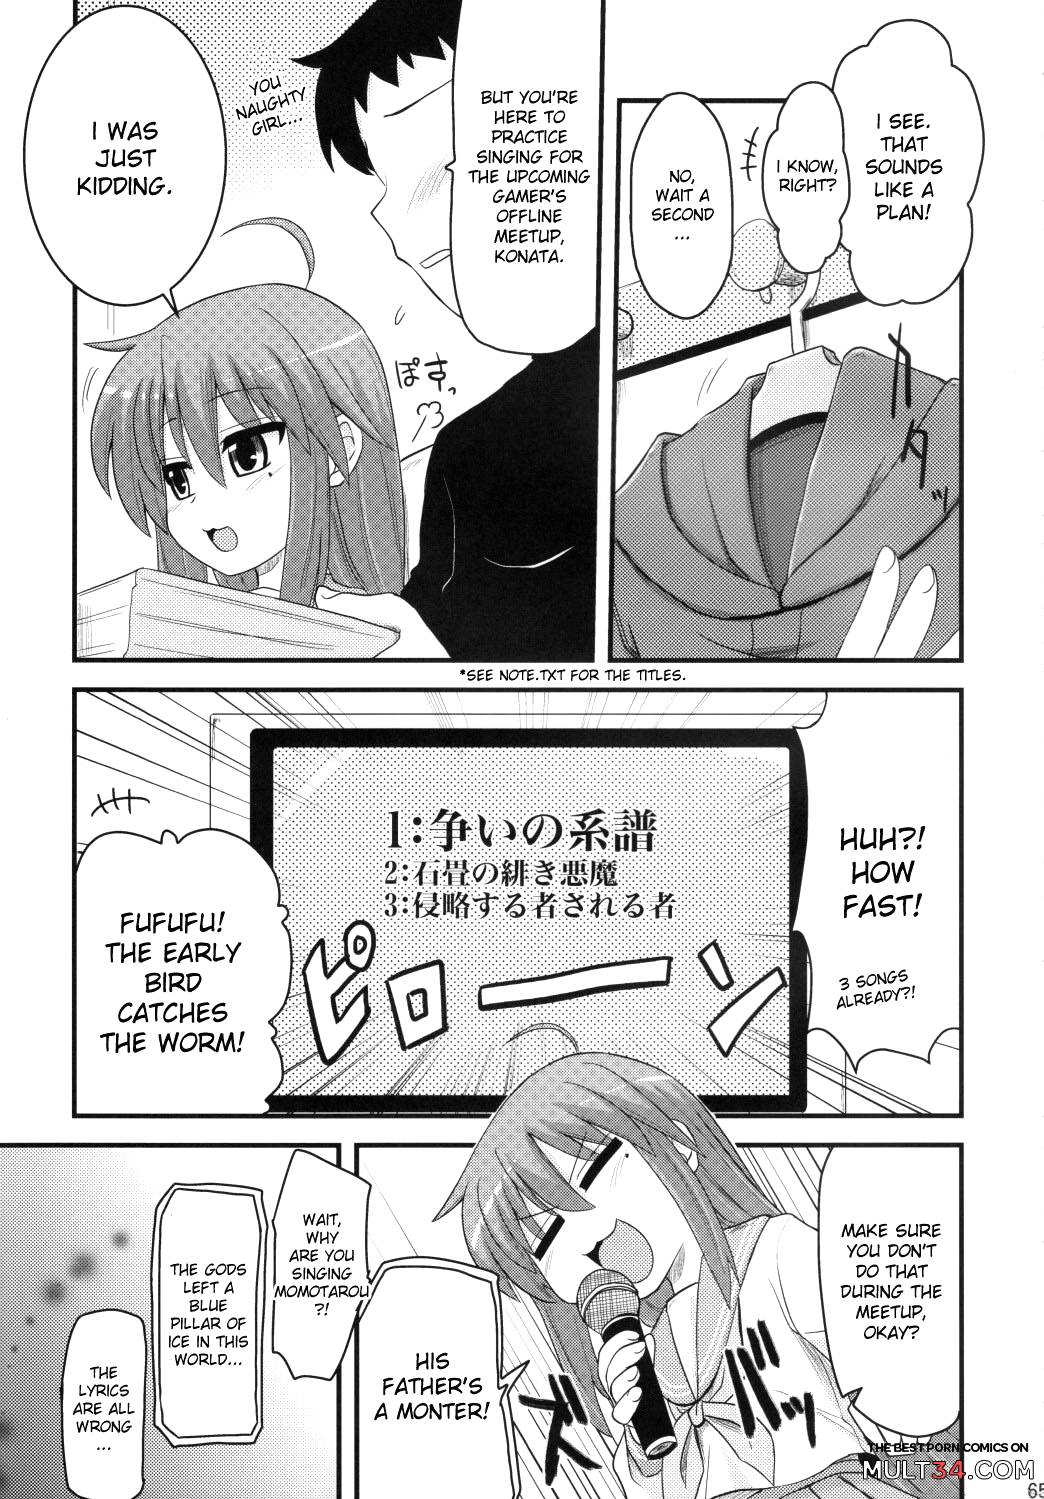 Konata and Oh-zu 4 people each and every one + 1 page 61